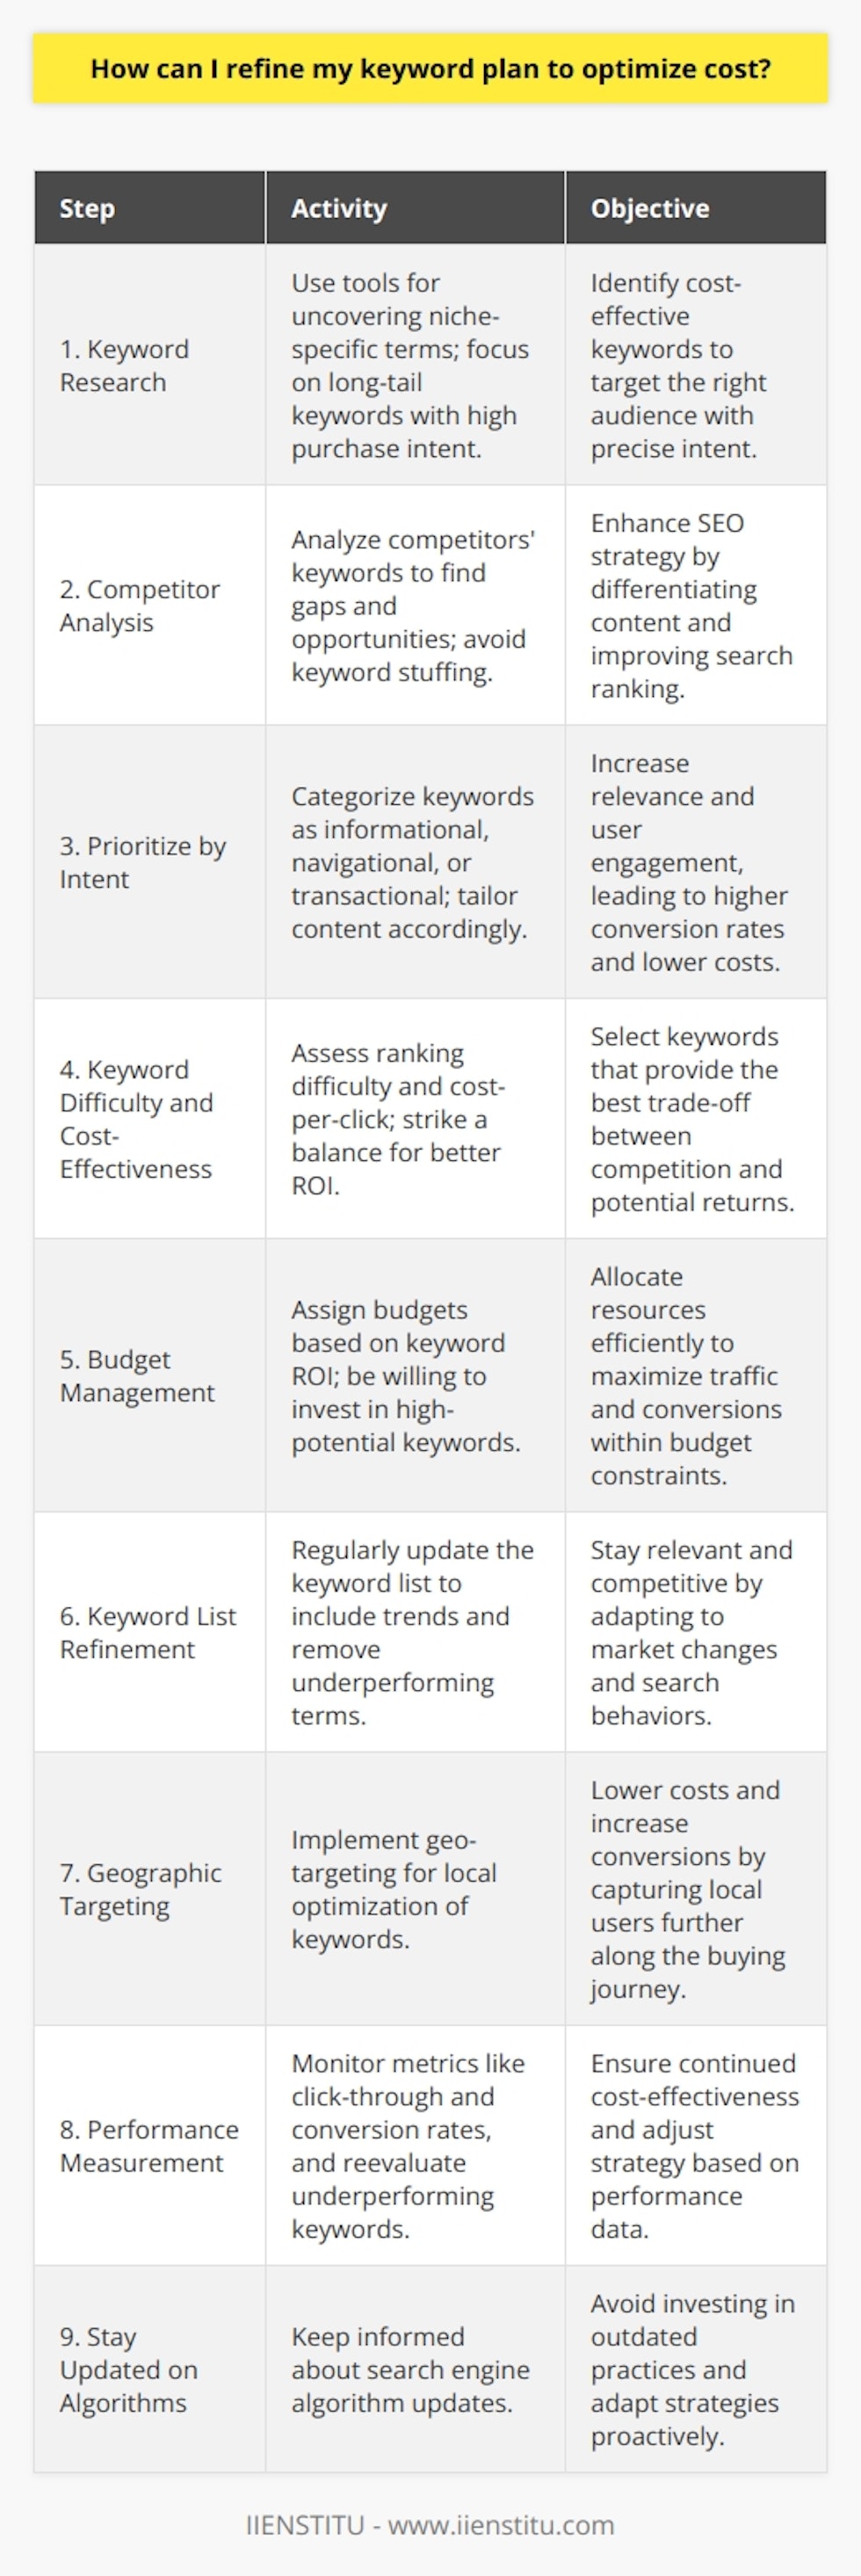 Effective keyword planning is the cornerstone of a cost-efficient and successful SEO strategy. It bridges the gap between what people are searching for and the content you are offering to meet that need. The goal is to draw in the right audience at minimal cost but with maximum return. Here are crucial steps to refine your keyword plan to optimize cost:**1. Start with Thorough Keyword Research:**Begin by delving deep into understanding your target audience's behavior. Use keyword research tools to uncover terms and phrases that are not only popular but also specific to your niche. Look for long-tail keywords that have a lower search volume but indicate high purchase intent. Such keywords are often less competitive and more cost-effective. Apart from digital tools, consider social listening and inspecting forums related to your field to gain insights into the language and concerns of potential customers.**2. Analyze Competitors’ Keywords:**Examine the keyword strategies of your competitors, especially those who rank well. Determine which keywords are driving traffic to their sites. This analysis can uncover gaps in your own plan and opportunities to differentiate your content. However, avoid keyword stuffing – the practice of overusing keywords – which can harm your SEO performance.**3. Prioritize Keywords by Intent:**Categorize the keywords based on user intent. Typically, keywords fall into three main buckets: informational, navigational, and transactional. Tailoring content to match the intent—for instance, writing a detailed guide for an informational query—can improve relevance and user engagement, leading to higher conversion rates at a lower cost.**4. Factor in Keyword Difficulty and Cost-Effectiveness:**Use SEO tools to determine the difficulty score for ranking each keyword and the associated cost-per-click if you're using paid search. While high-competition keywords can be tempting because of their high search volume, they might not be the most cost-effective choices. Instead, finding a balance between competition, search volume, and relevance can lead to better ROI.**5. Set Realistic Budgets and Allocate Wisely:**Cost management is key. Assign budgets based on the potential ROI of a keyword. A high cost-per-click isn't inherently off-putting if the keyword’s potential to convert is also high. Conversely, even low-cost keywords shouldn't consume your budget if they're unlikely to attract qualified traffic.**6. Refine and Expand Your Keyword List Regularly:**Keyword dynamics can change rapidly as new trends emerge. Regularly review your keyword list, adding new relevant terms and phasing out those that underperform or are no longer aligned with your content.**7. Leverage Geographic Targeting for Local Optimization:**For businesses with a local customer base, geo-targeting specific keywords can significantly reduce costs. Users searching for local services are often further along the buying journey, and geo-specific keywords can have a higher conversion rate.**8. Continuously Measure Performance:**Utilize analytics tools to monitor your keywords' performance, examining aspects such as click-through rates, bounce rates, and conversion rates. If a keyword is draining your budget without delivering returns, it may require reevaluation.**9. Stay Informed on Algorithm Updates:**Finally, keep abreast of changes in search engine algorithms. What works today may not work tomorrow, so staying informed can save you from investing in outdated practices.Refining a keyword plan isn't a one-time task but an ongoing process of optimization and adjustment. By marrying data-driven decisions with a keen understanding of your audience, you can develop a keyword strategy that not only brings traffic but also boosts your bottom line. Through diligent research, smart budget allocation, and the continuous evolution of your keyword plan, optimizing costs while improving the SEO performance becomes an attainable goal.